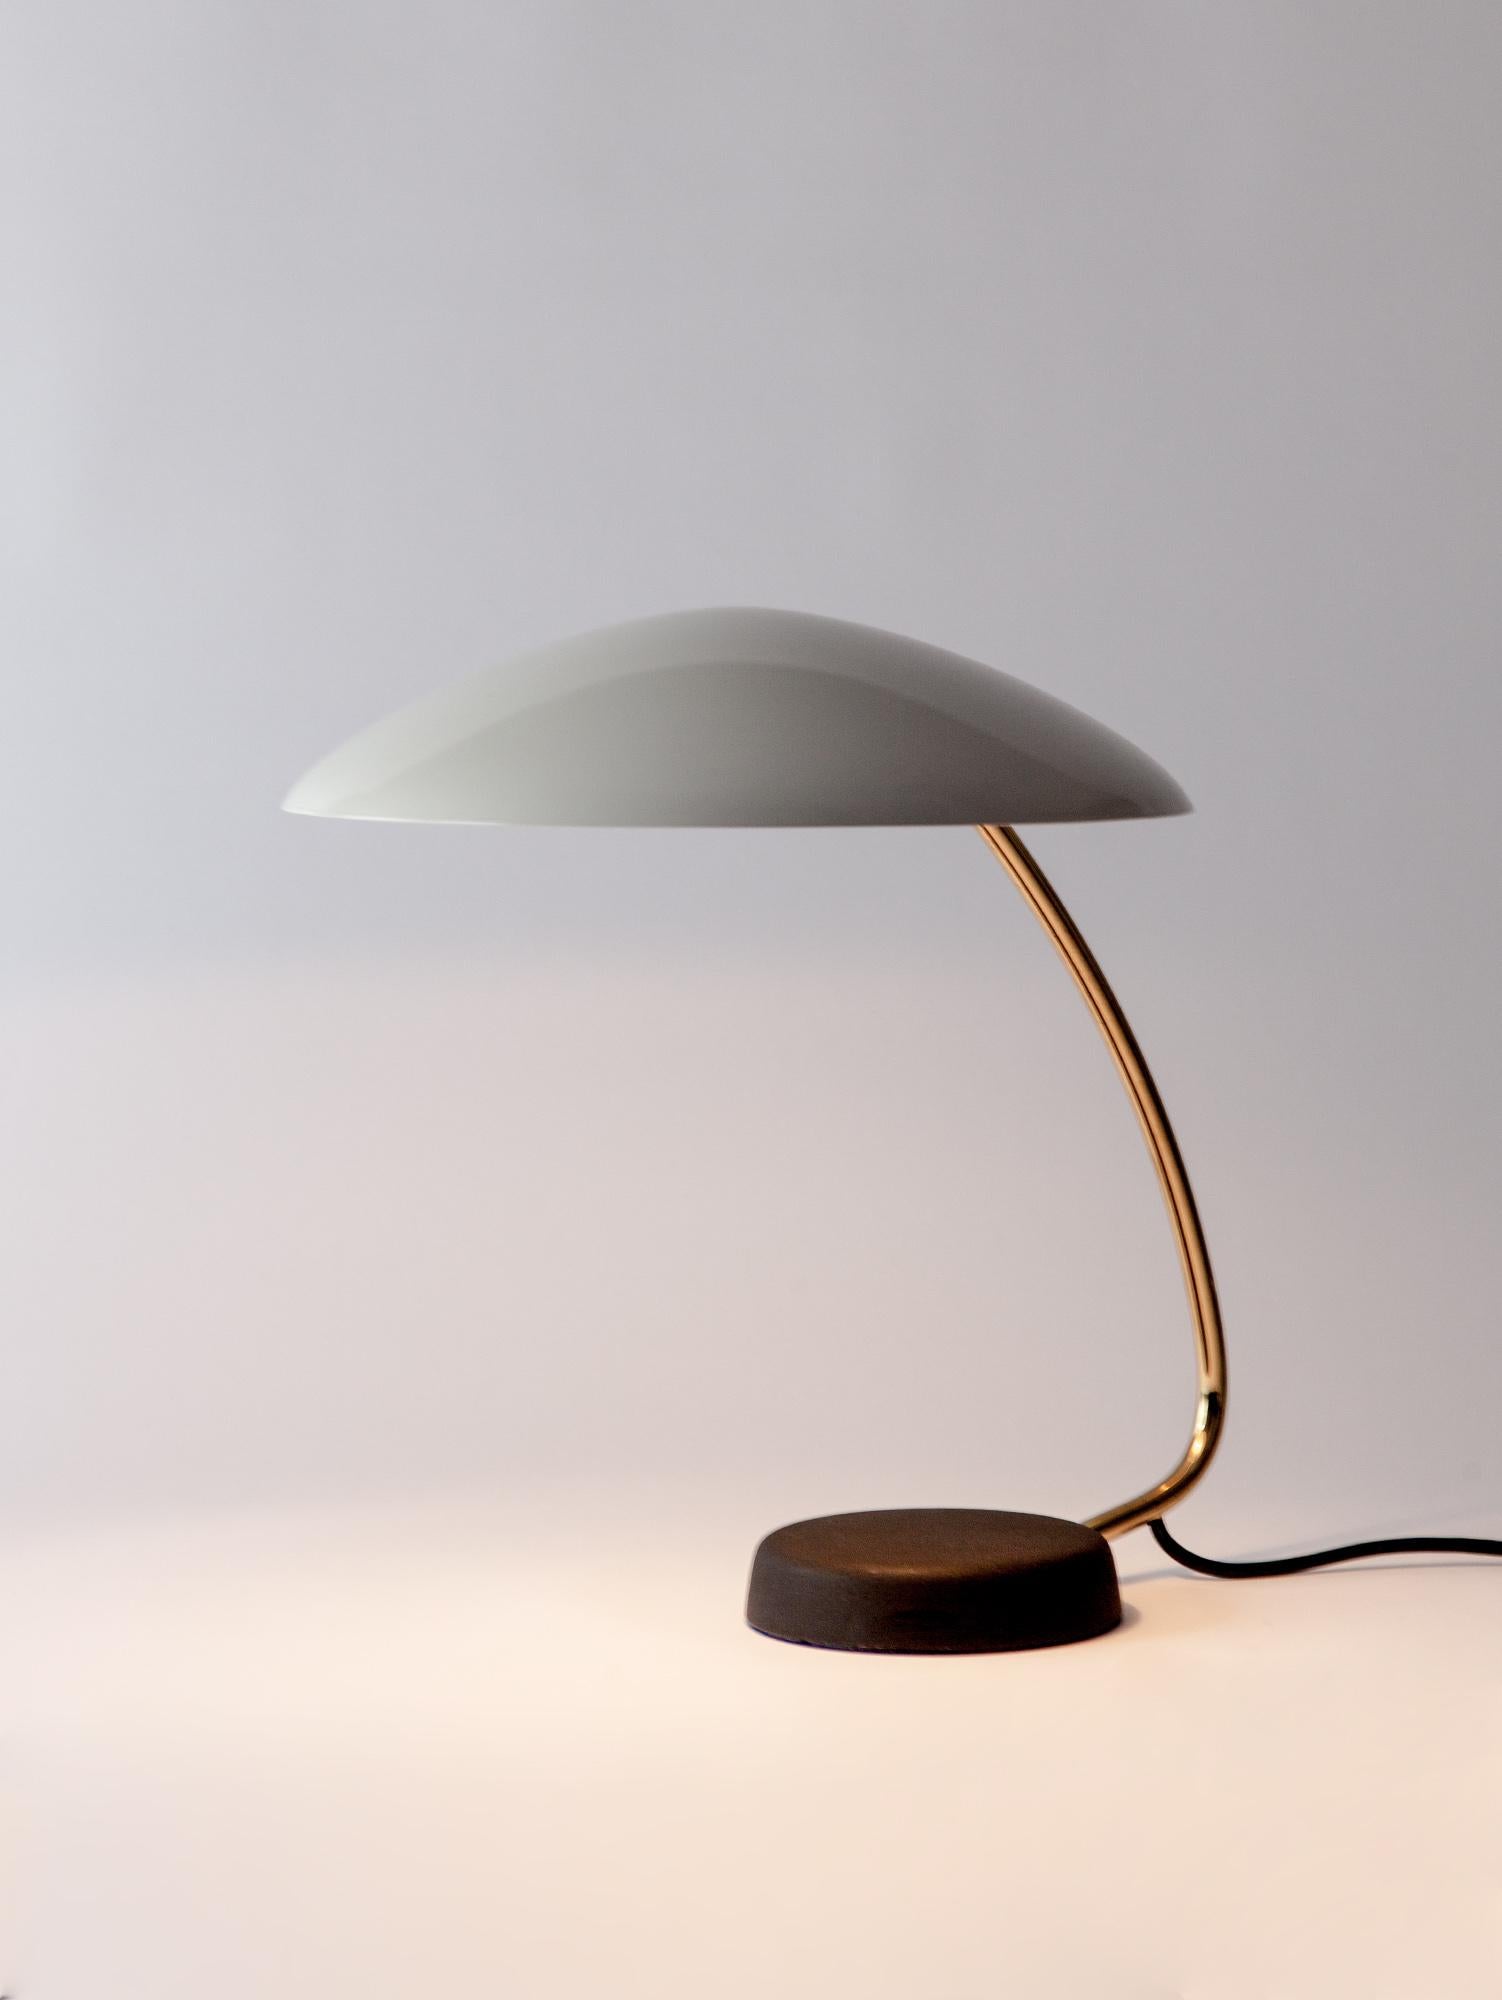 Stunning vintage table lamp by Cosack Leuchten. Sitting on a solid black base, with its original textural paint, the rounded form is continued in the white shade. The curved brass stem detail allows the shade to tilt. Made in Germany in the